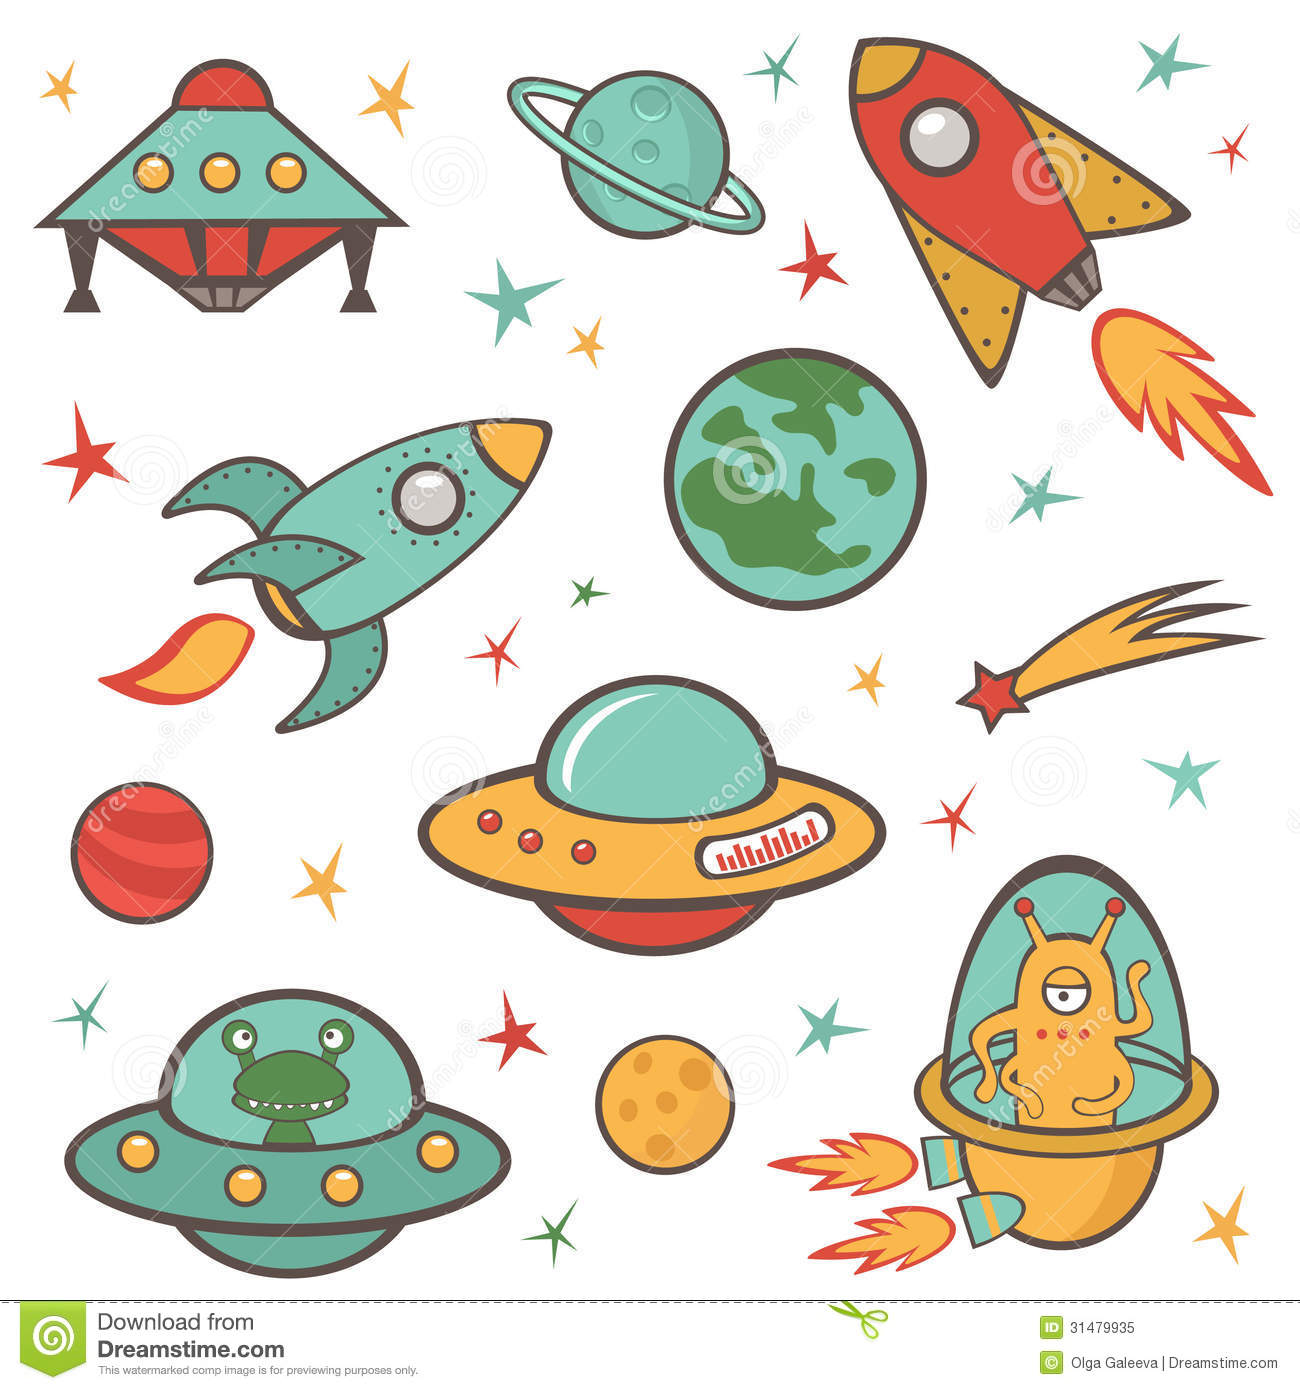 Outer space clipart - ClipartFest